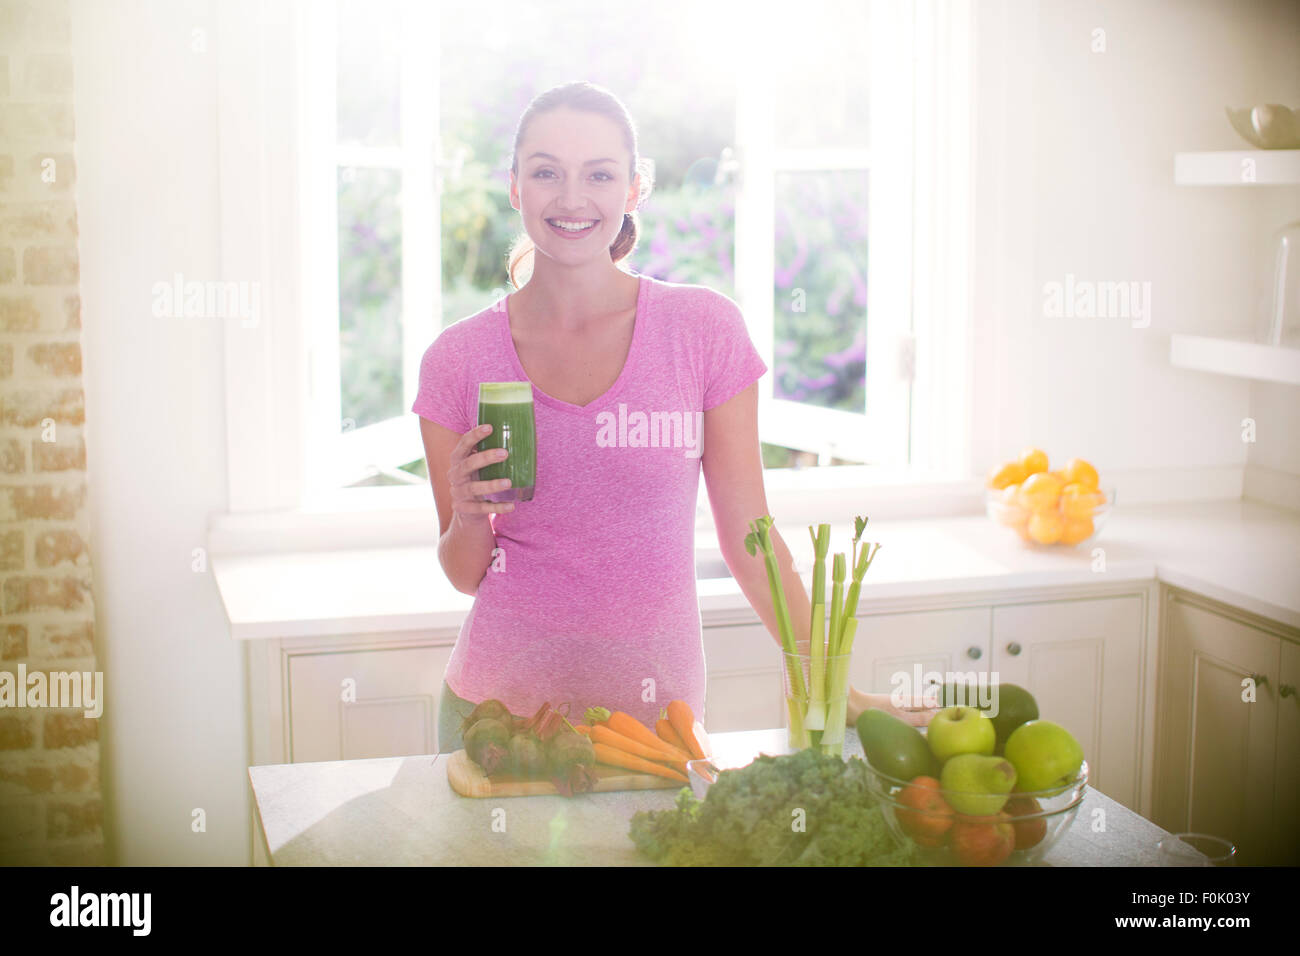 Portrait smiling woman drinking green smoothie in kitchen Stock Photo